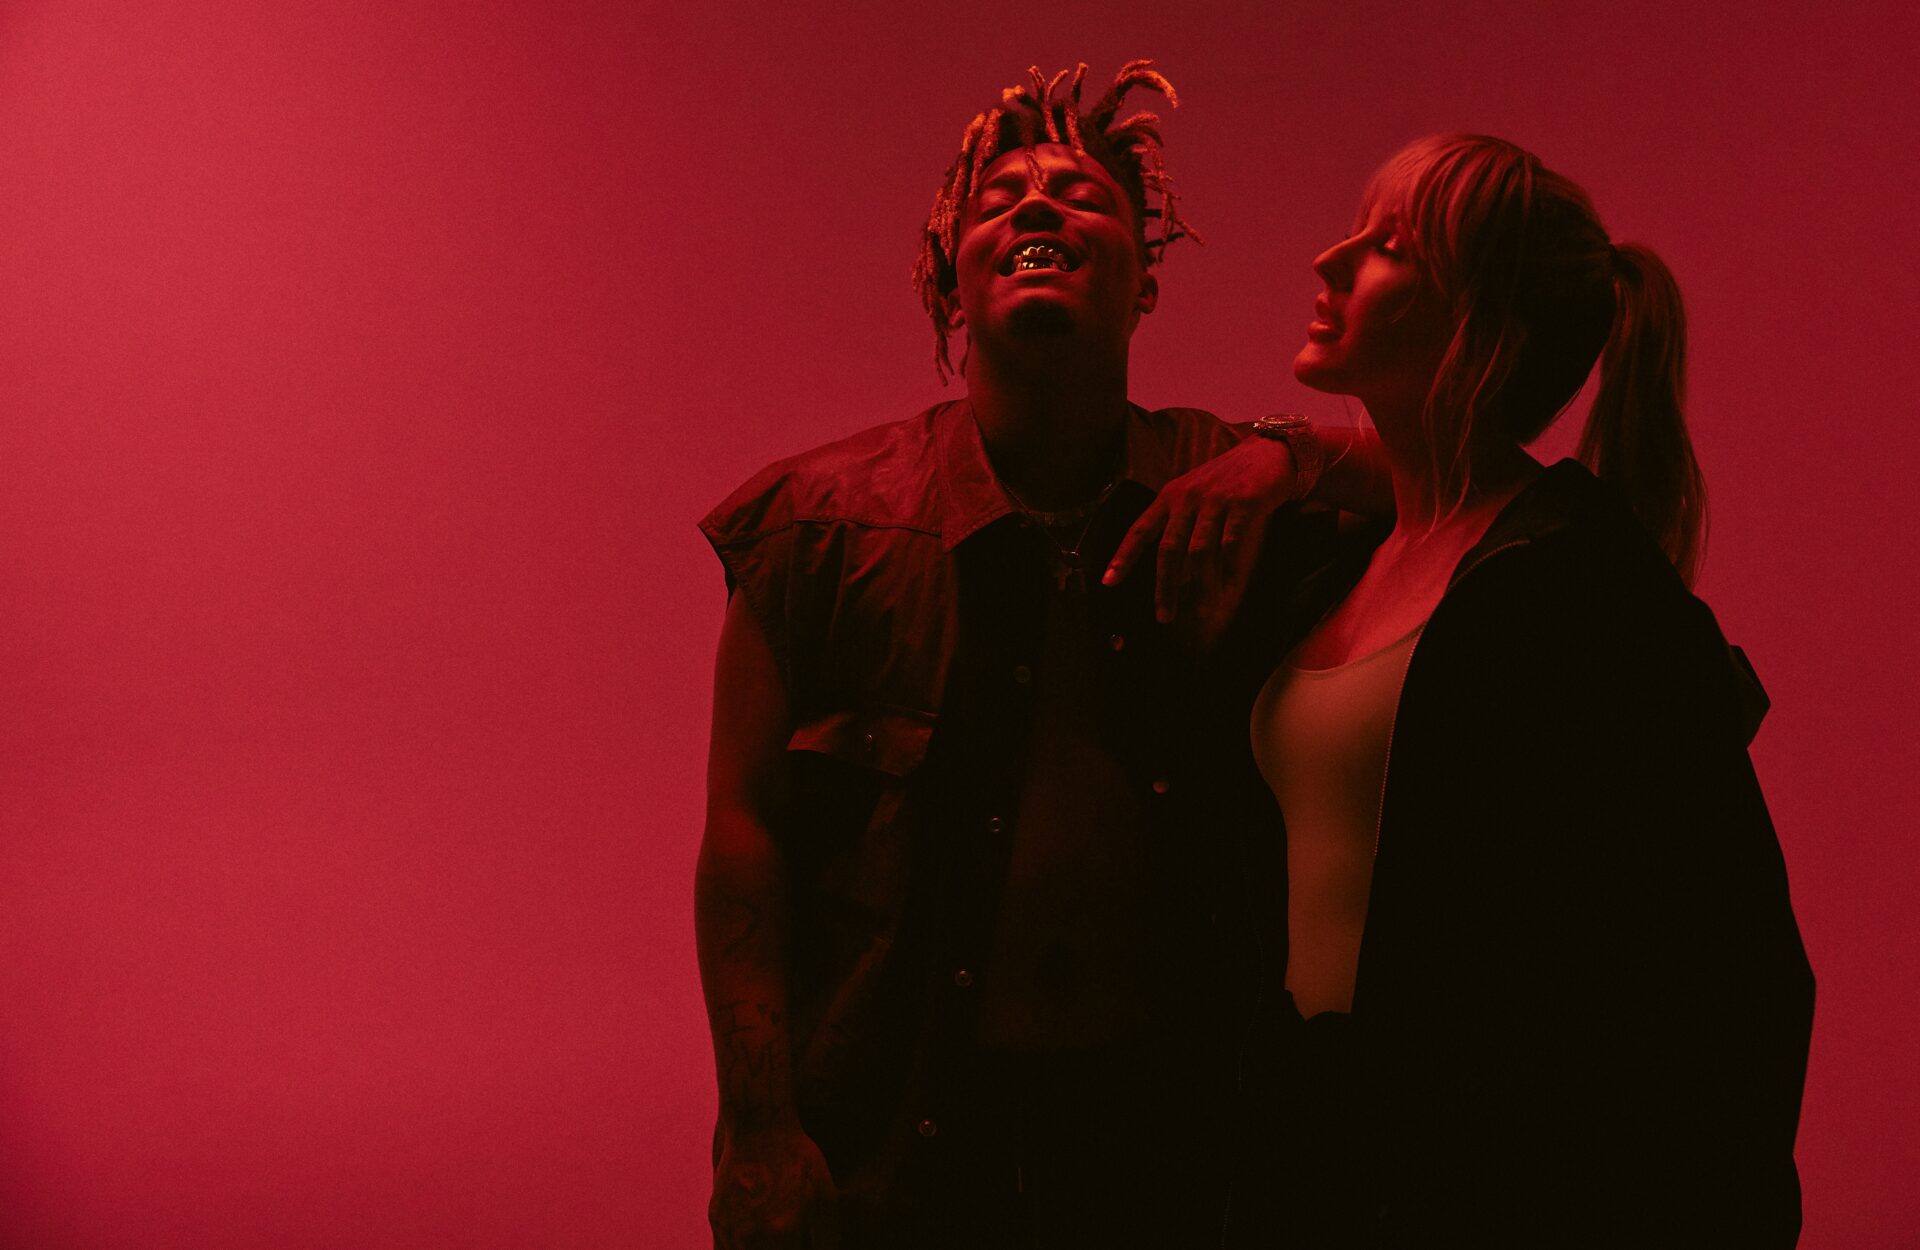 Ellie Goulding drops new collaboration with Juice WRLD, “Hate Me”